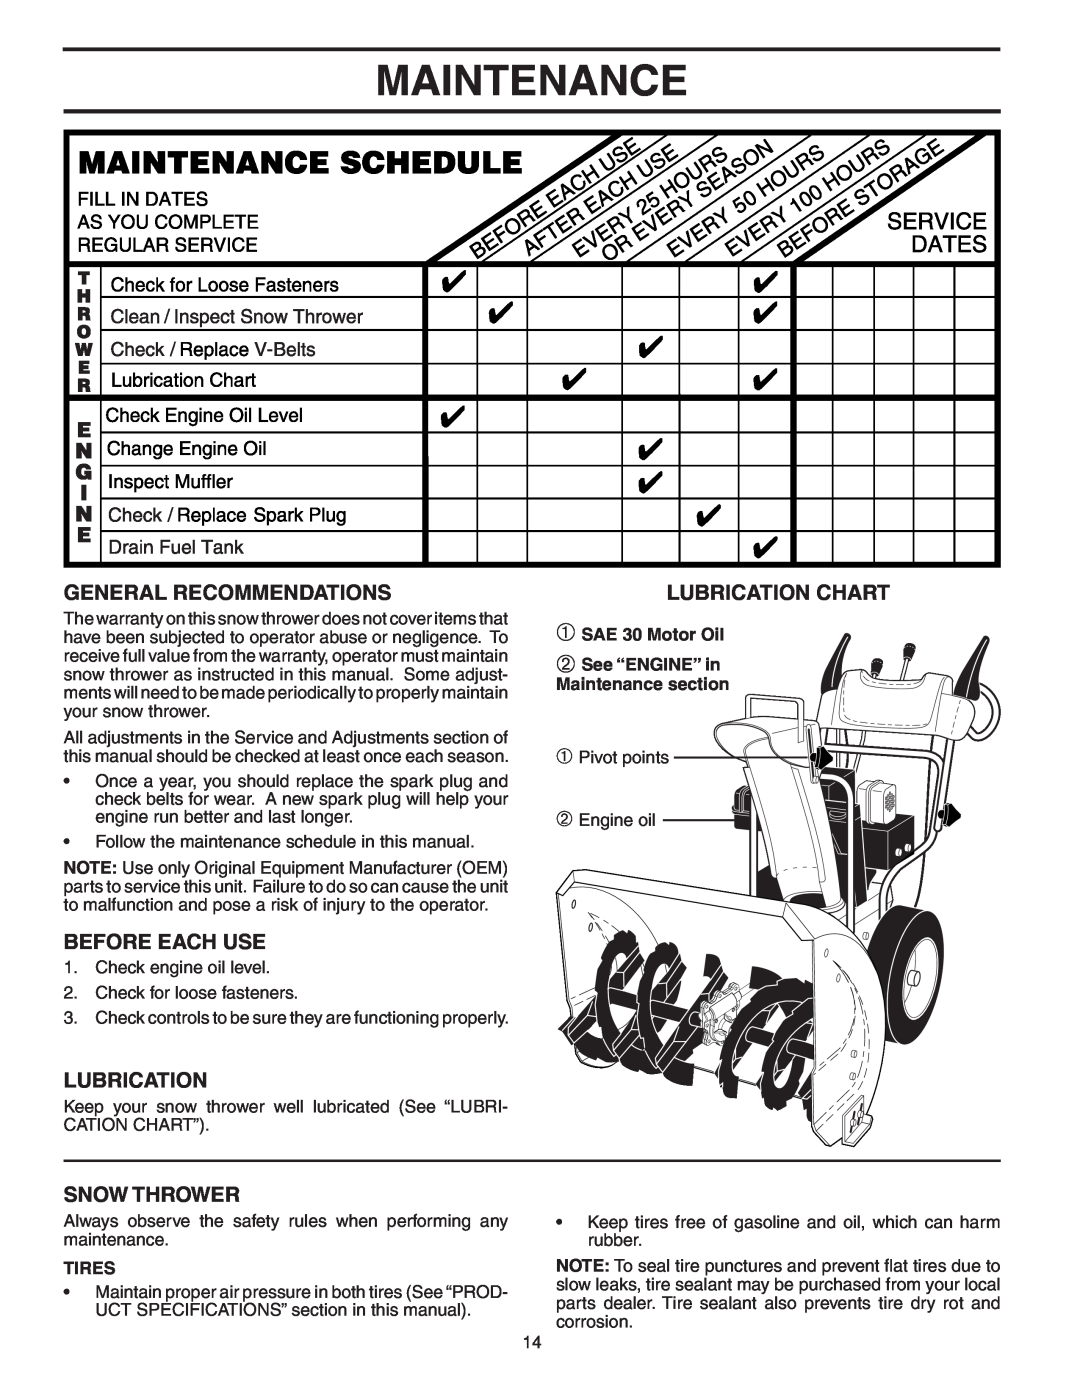 Poulan 183618 Maintenance, General Recommendations, Before Each Use, Snow Thrower, Lubrication Chart, Tires 